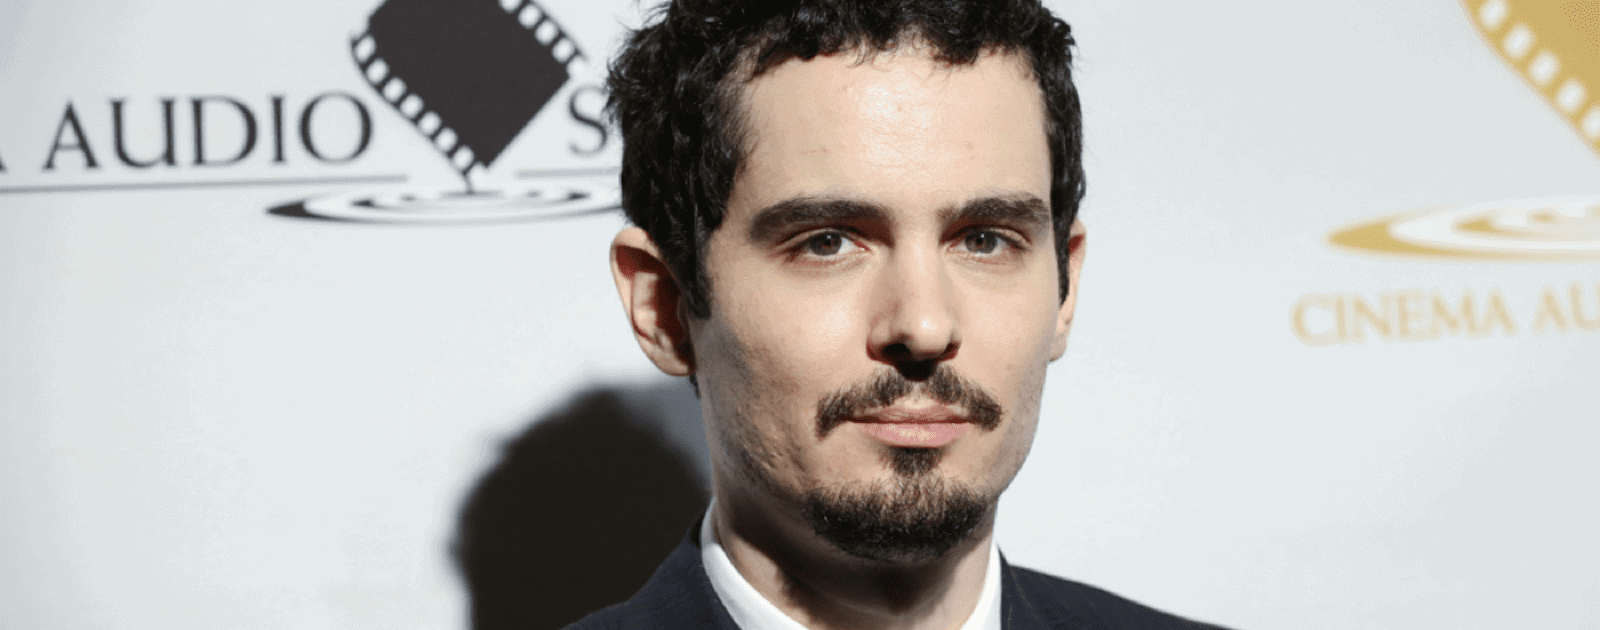 Apple Just Committed to a Straight-to-Series Order by Damien Chazelle